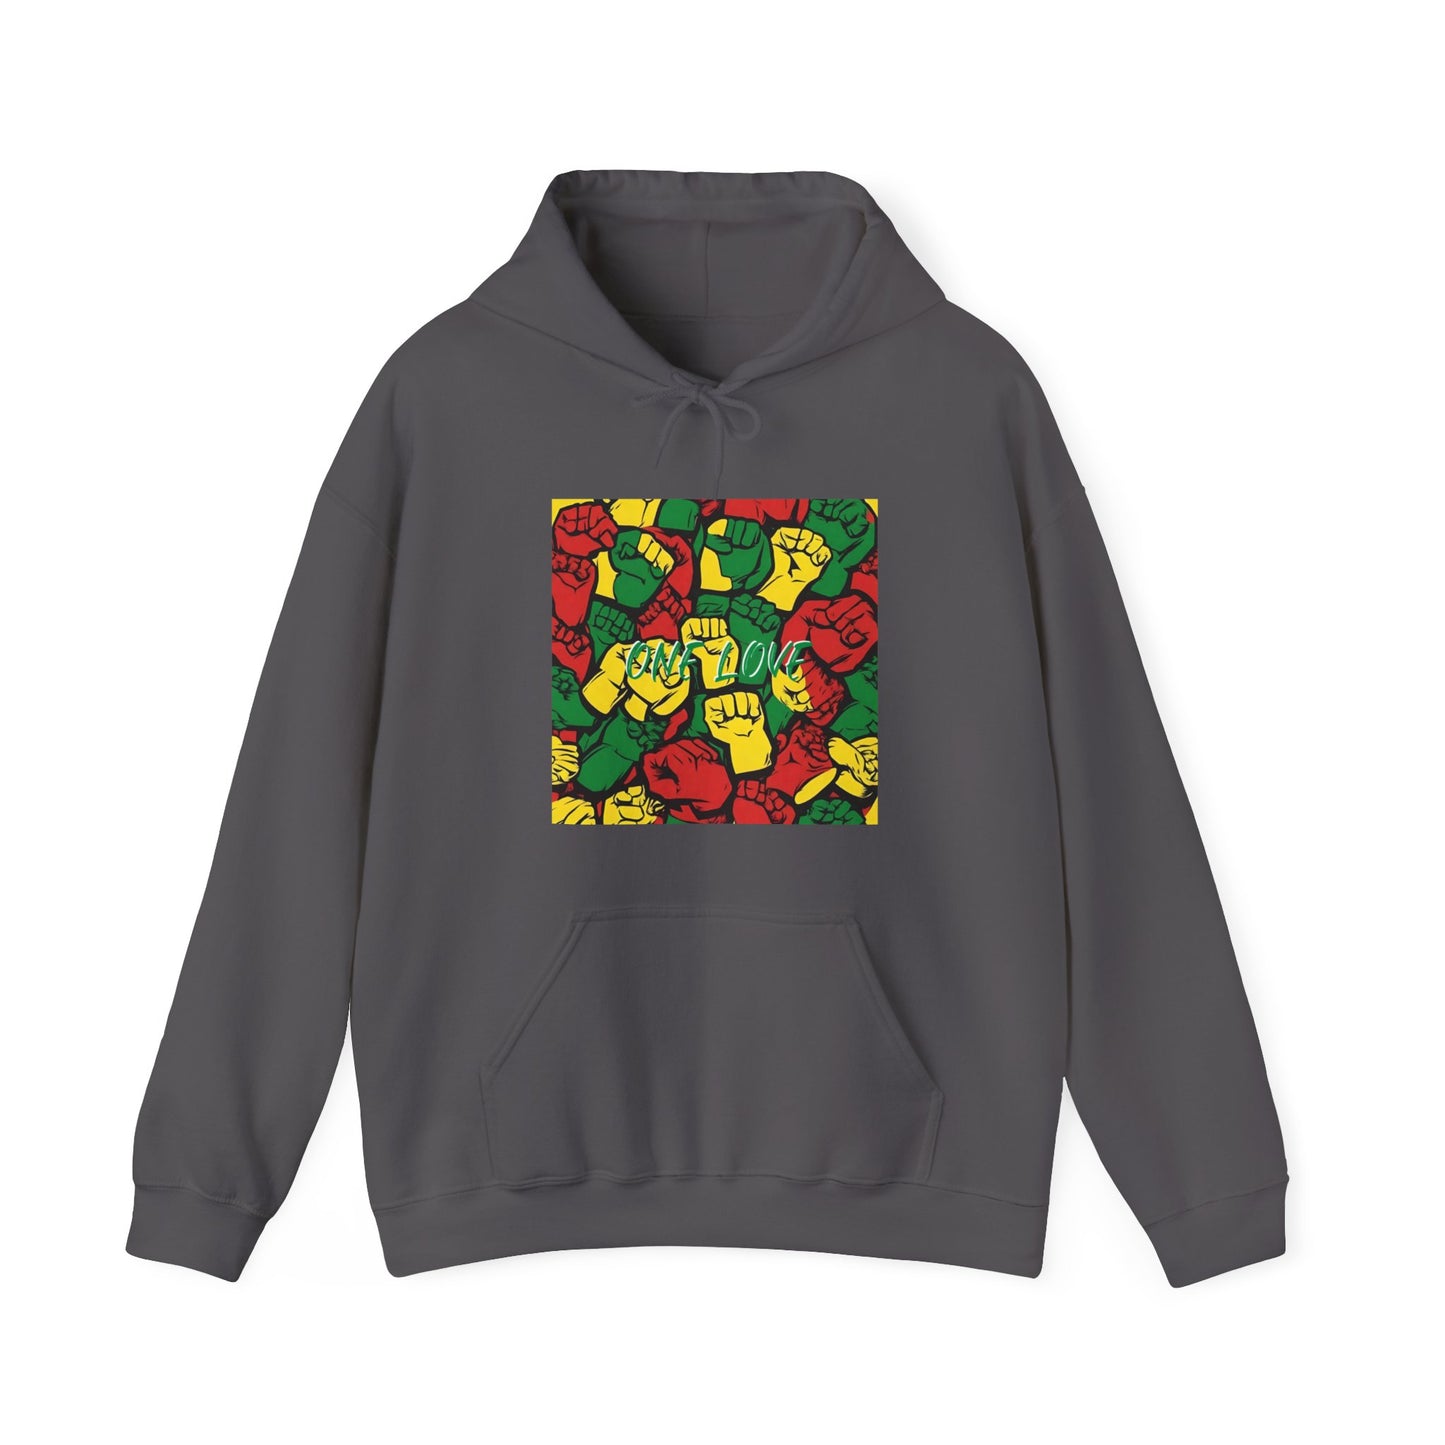 ONE LOVE FIST DESIGN HOODED SWEATSHIRT FOR ROOTS LOVERS